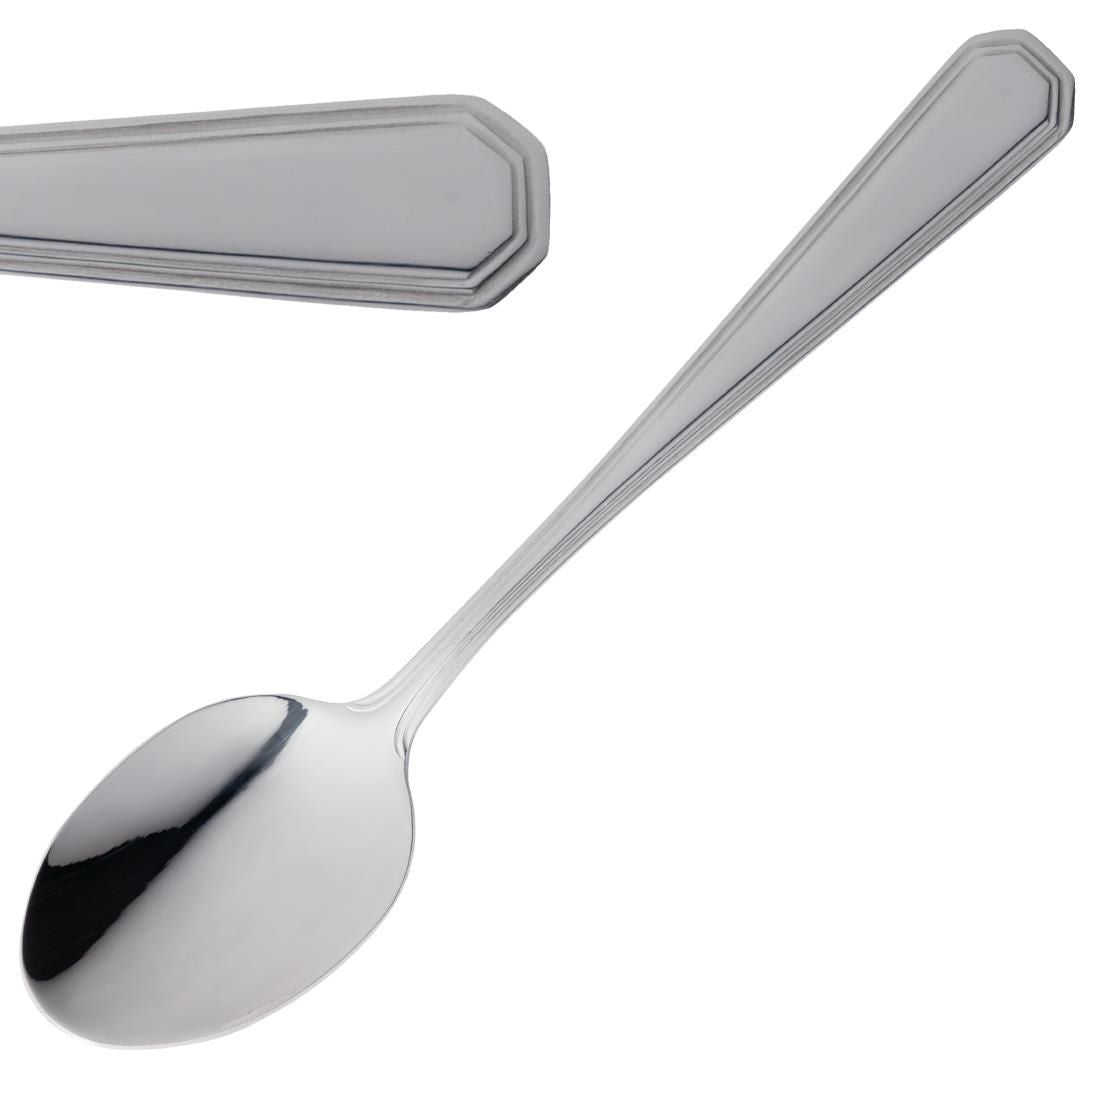 D057 Olympia Monaco Dessert Spoon (Pack of 12) JD Catering Equipment Solutions Ltd